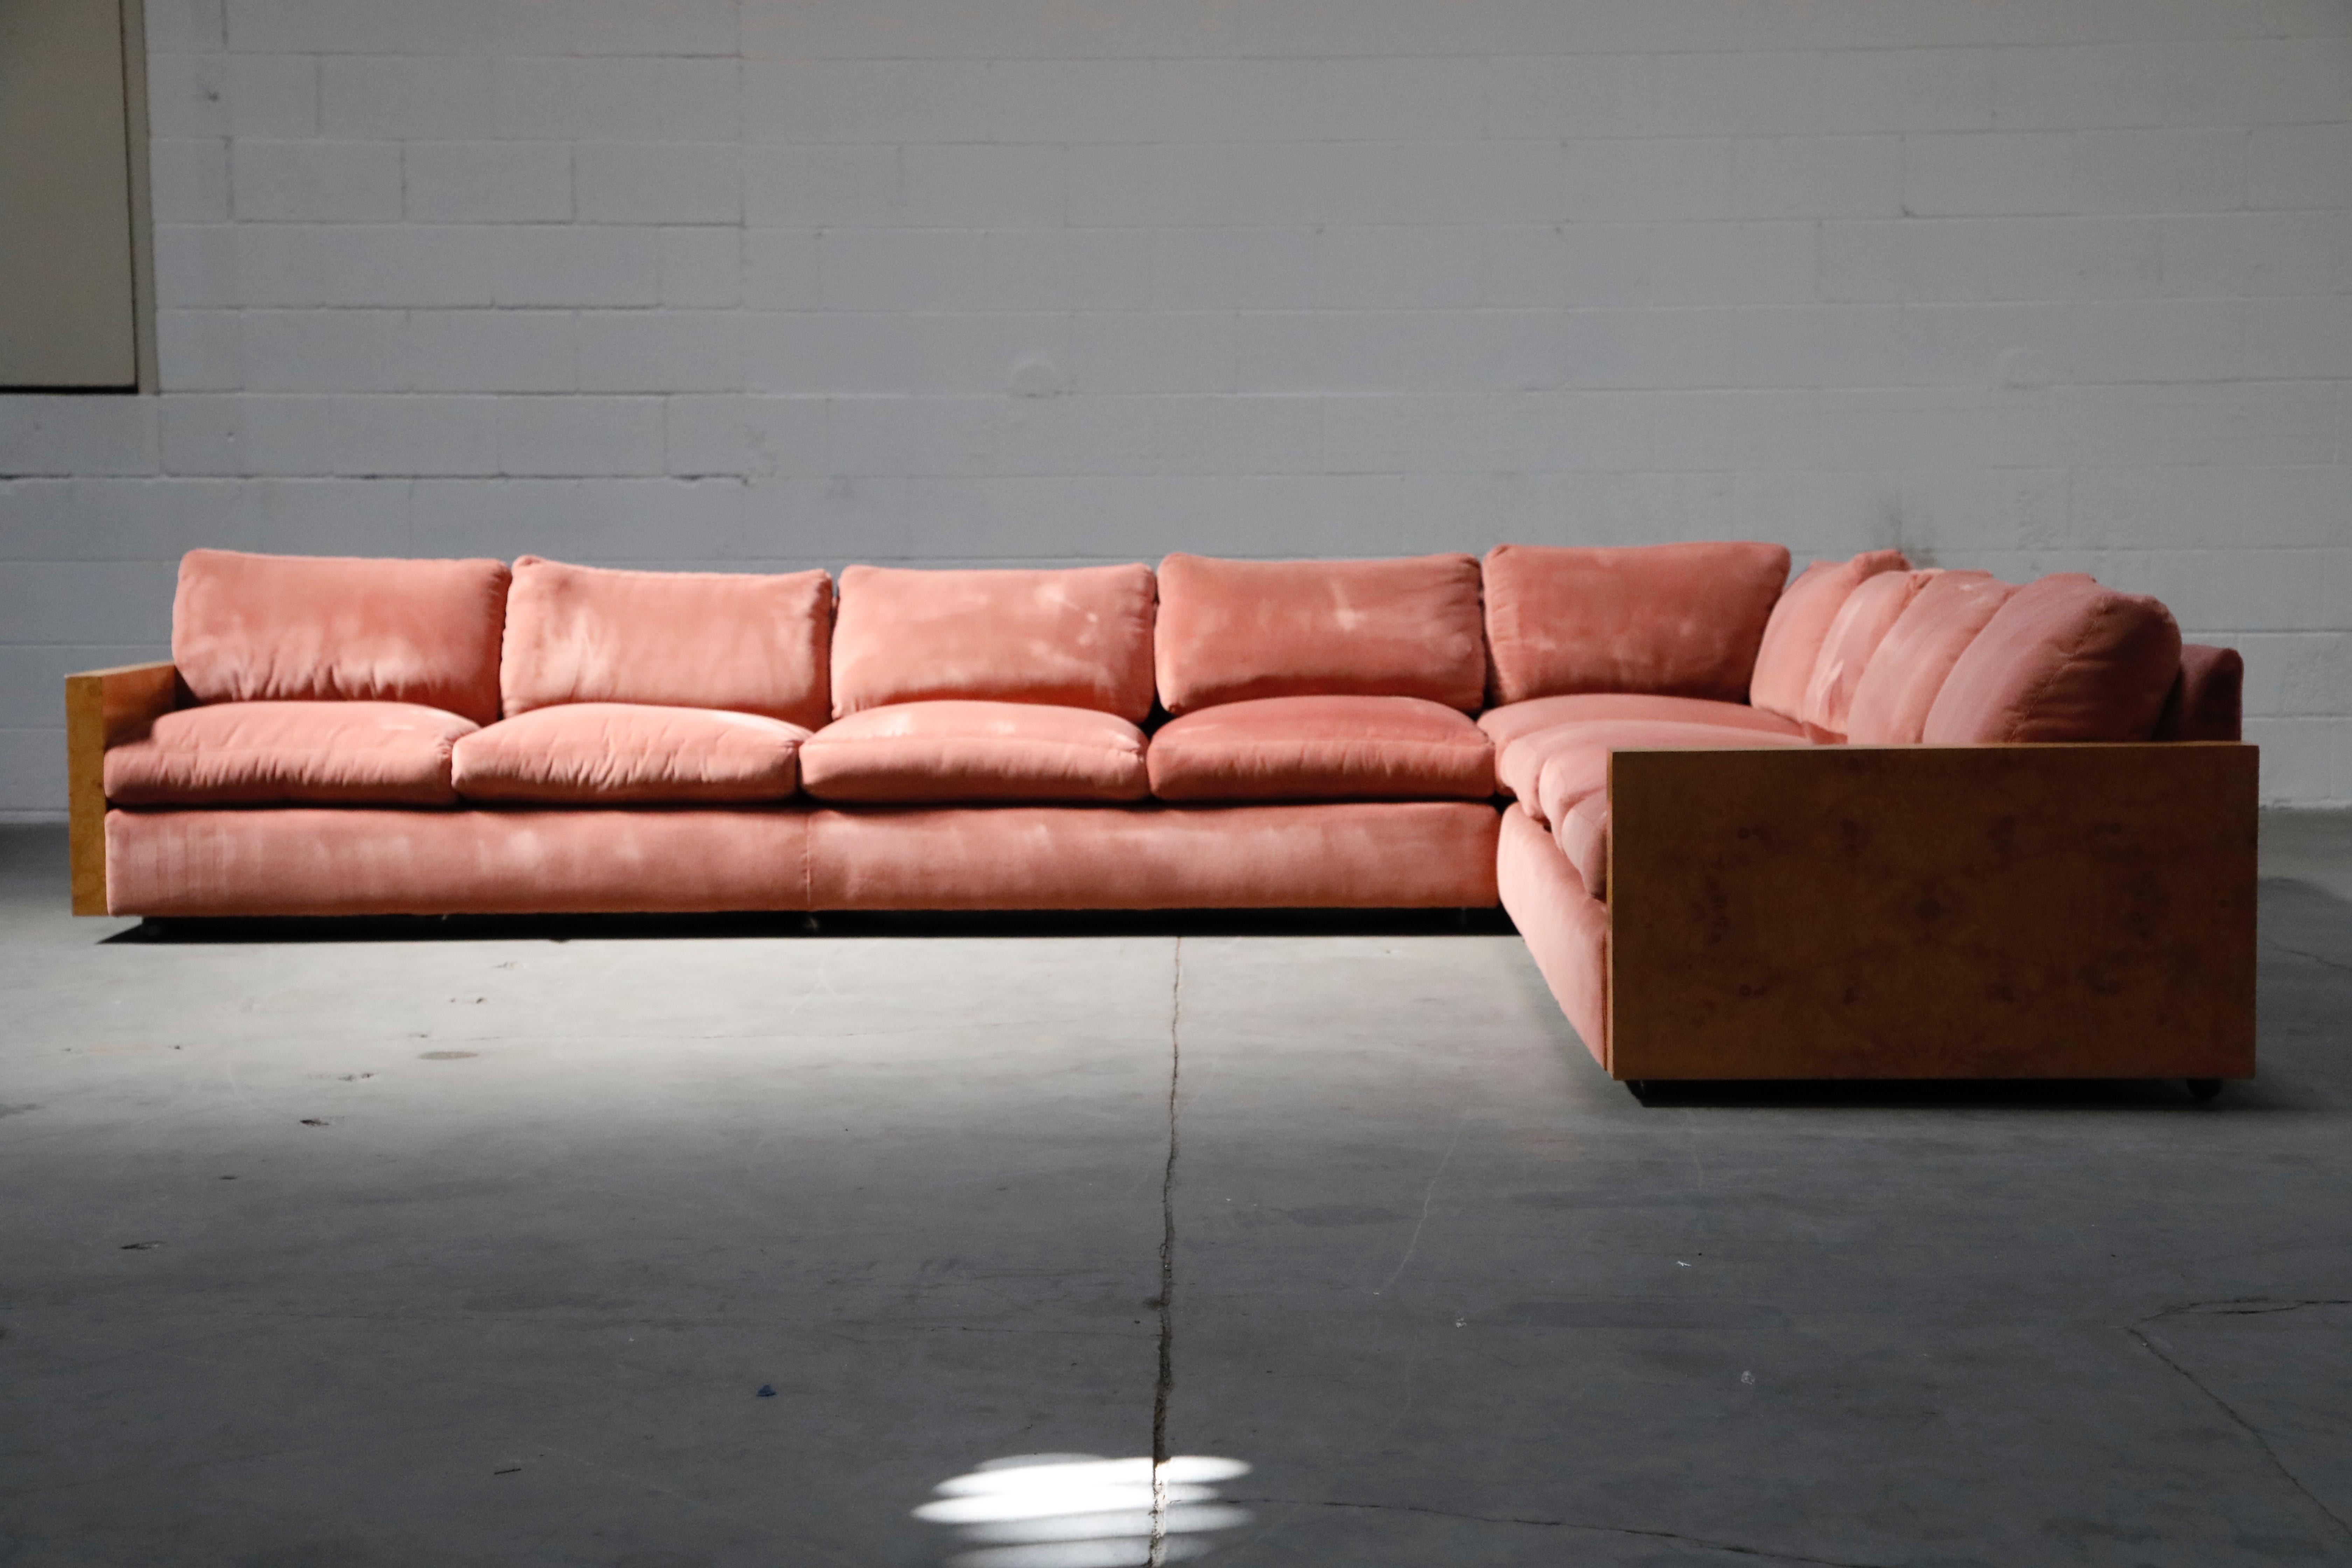 This must-have sectional sofa set is by Milo Baughman for Thayer Coggin, featuring soft luxurious pink velvet with burled wood arms, and in an incredibly spacious size, this is the perfect entertainment couch for any pad, studio, boutique or